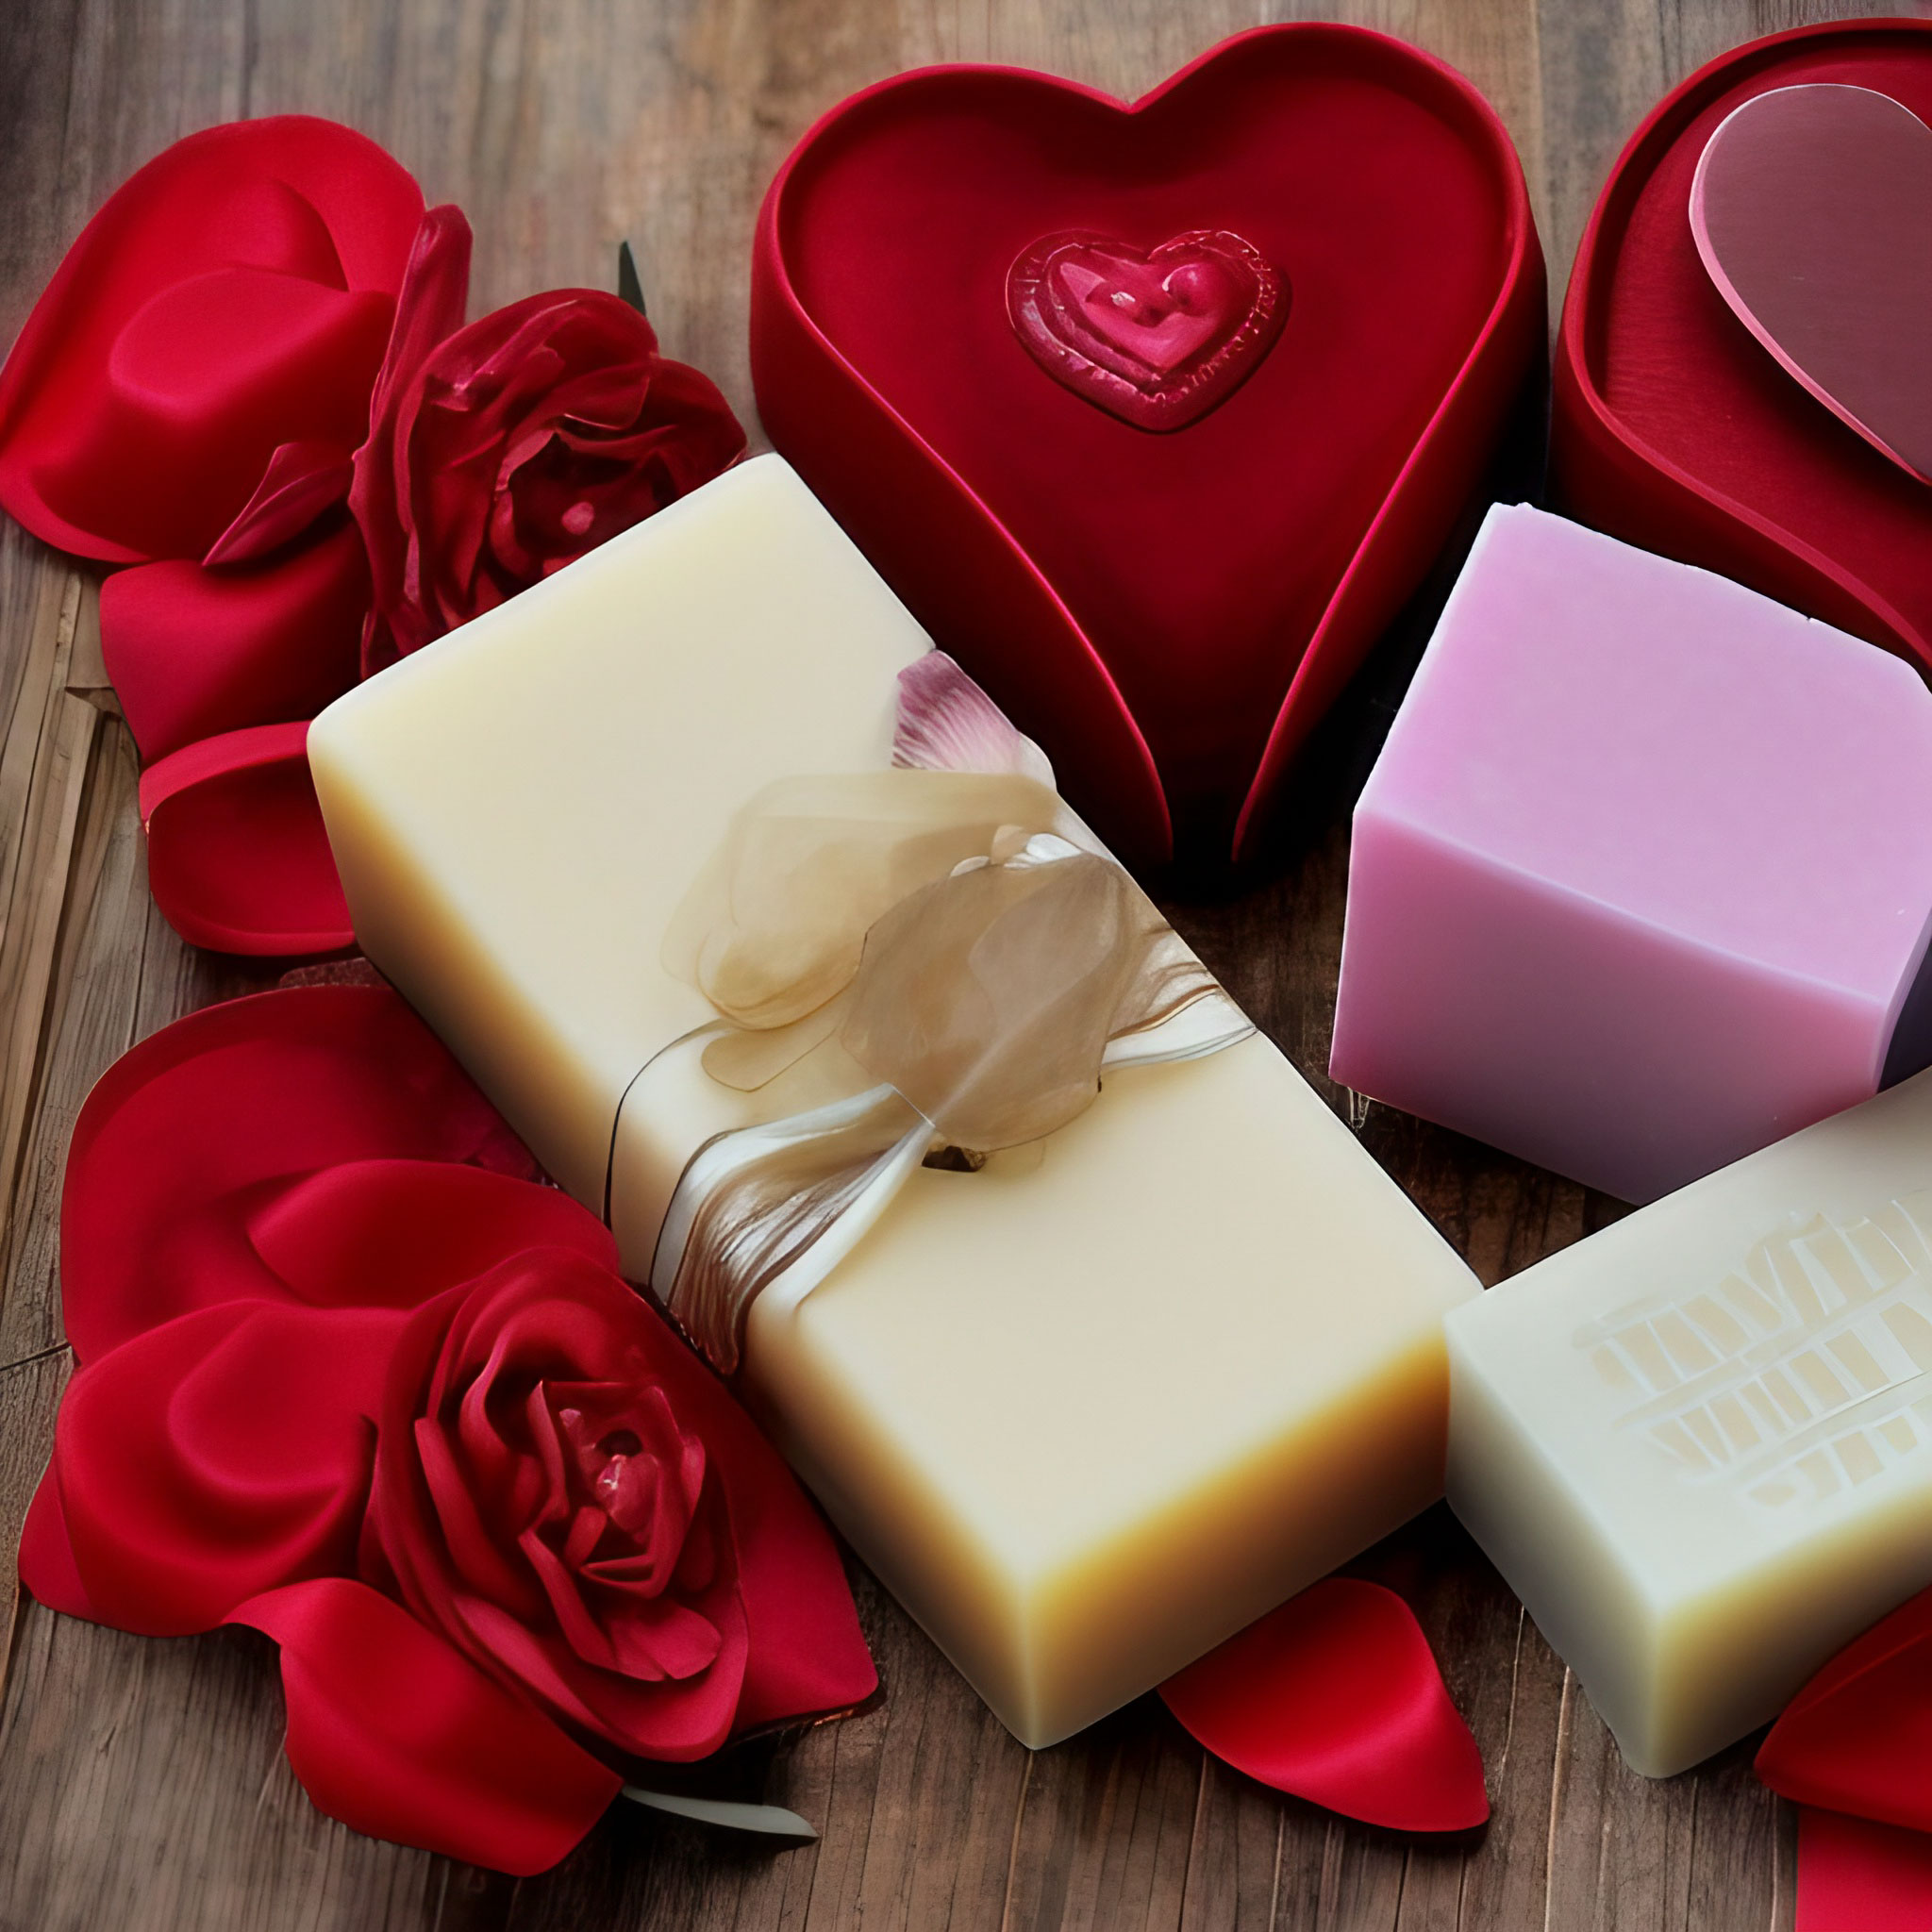 soap for the face, hands, or body with hearts and flowers as decorations on wooden table